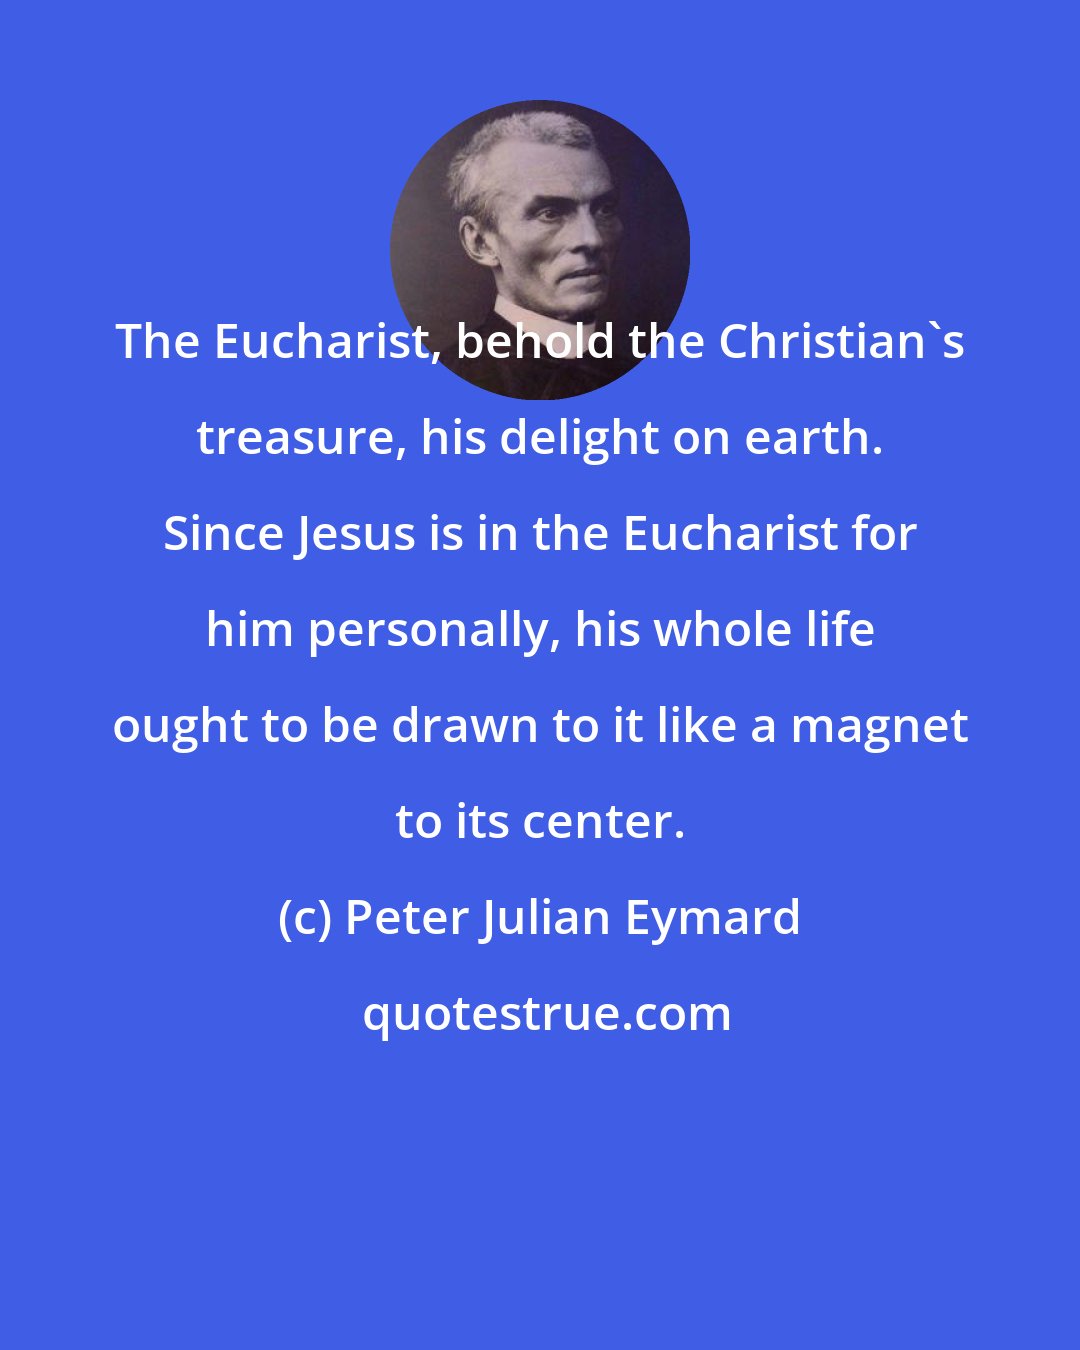 Peter Julian Eymard: The Eucharist, behold the Christian's treasure, his delight on earth. Since Jesus is in the Eucharist for him personally, his whole life ought to be drawn to it like a magnet to its center.